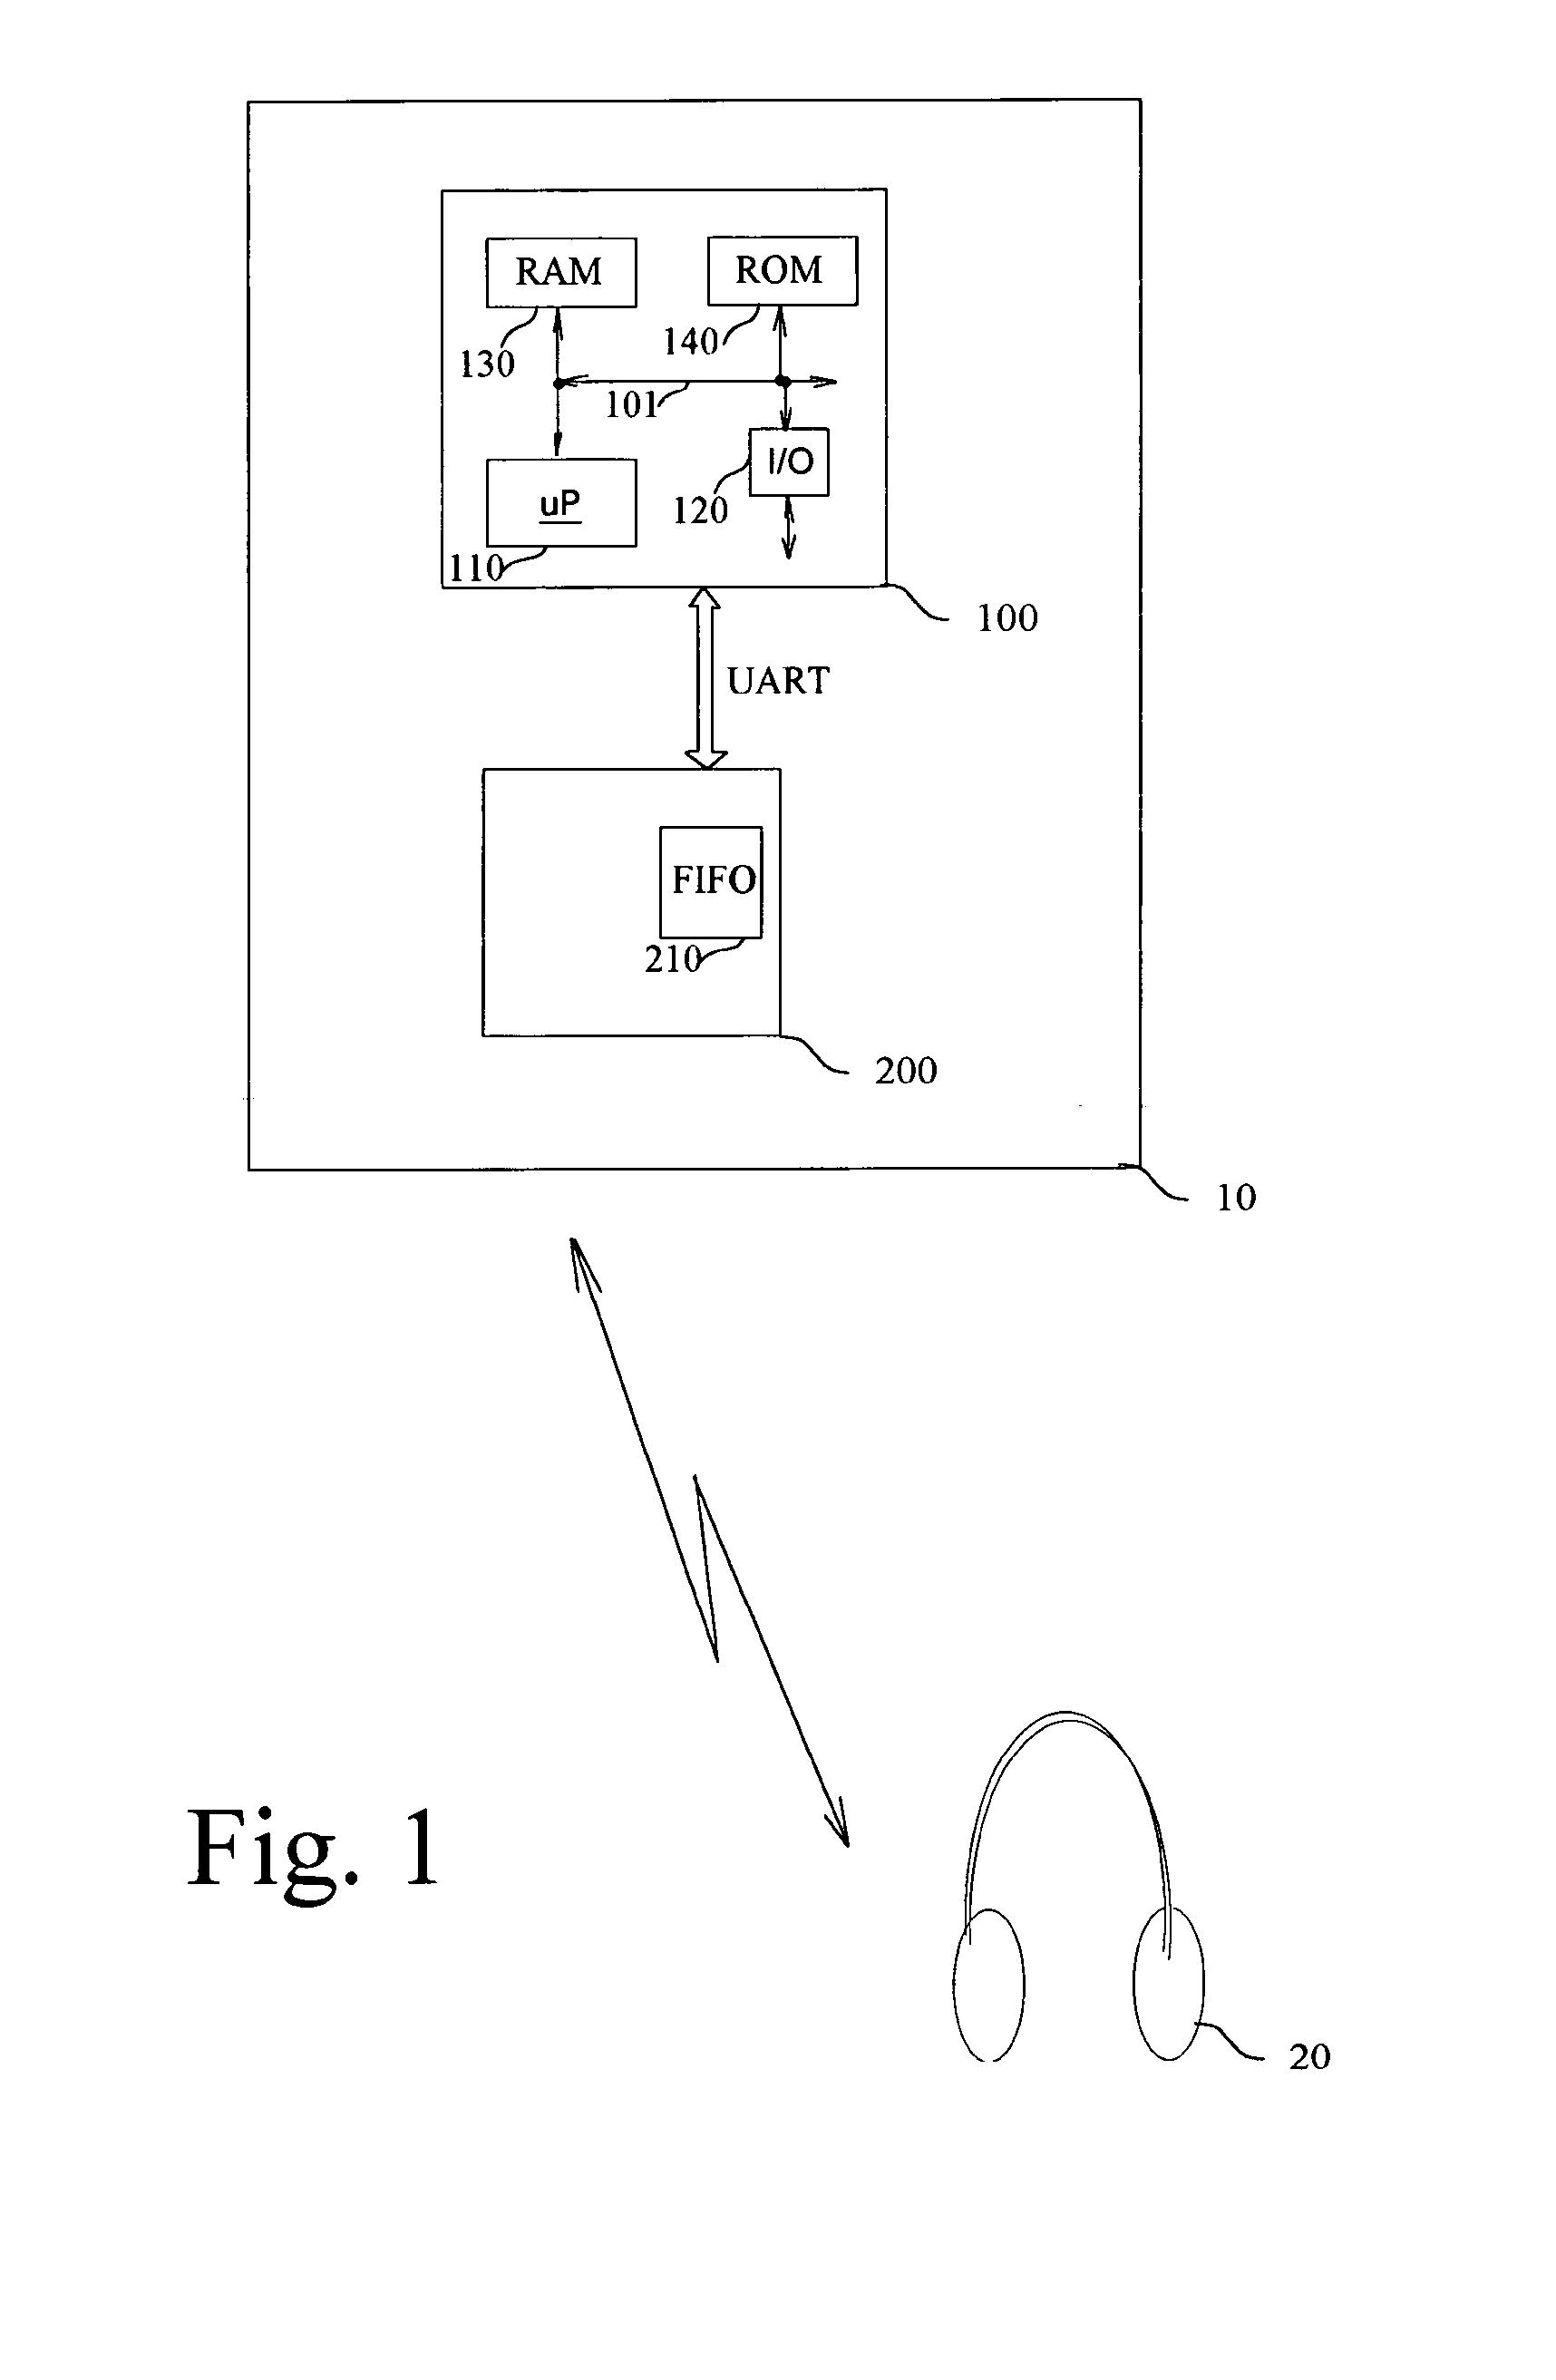 Process of Audio Data Exchanges of Information Between a Central Unit and a Bluetooth Controller